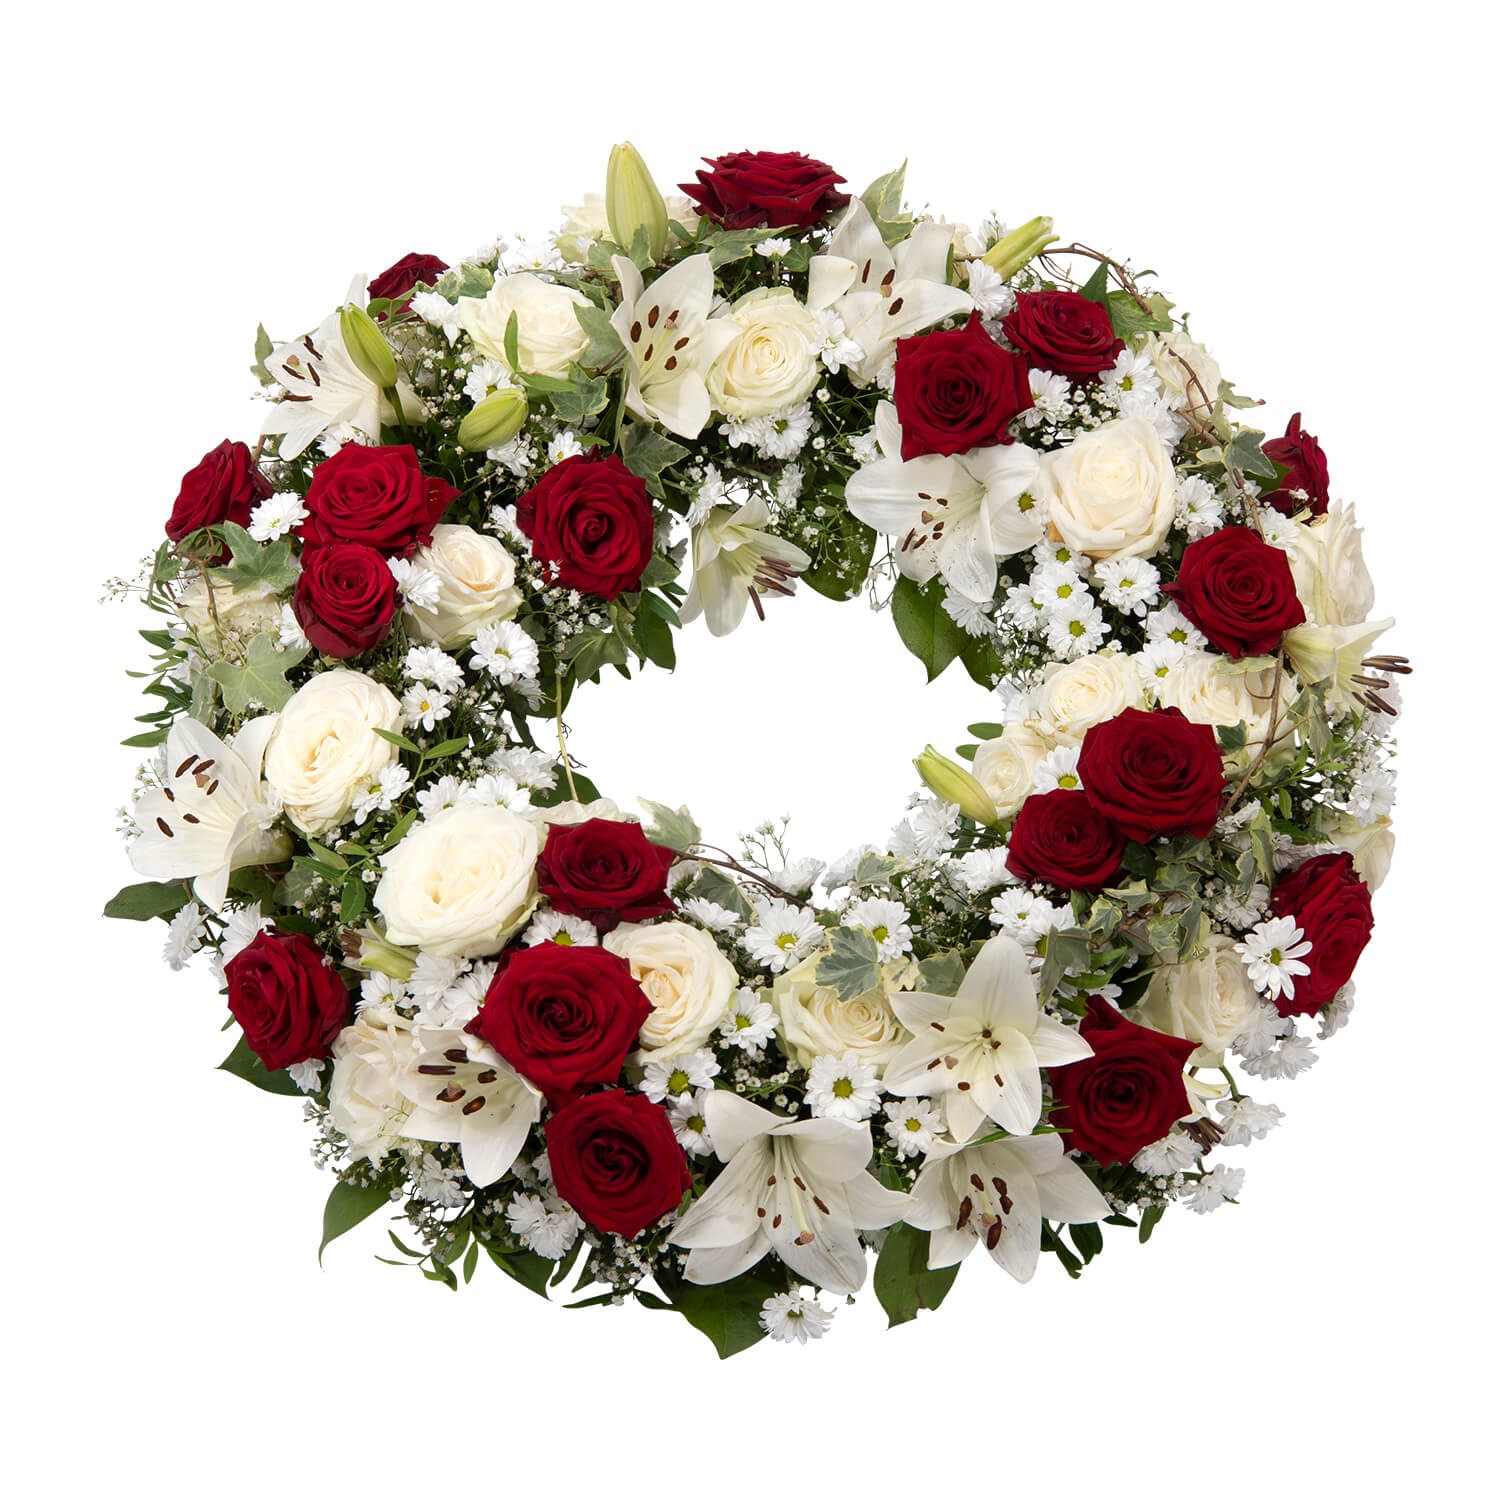 Funeral wreath in red and white